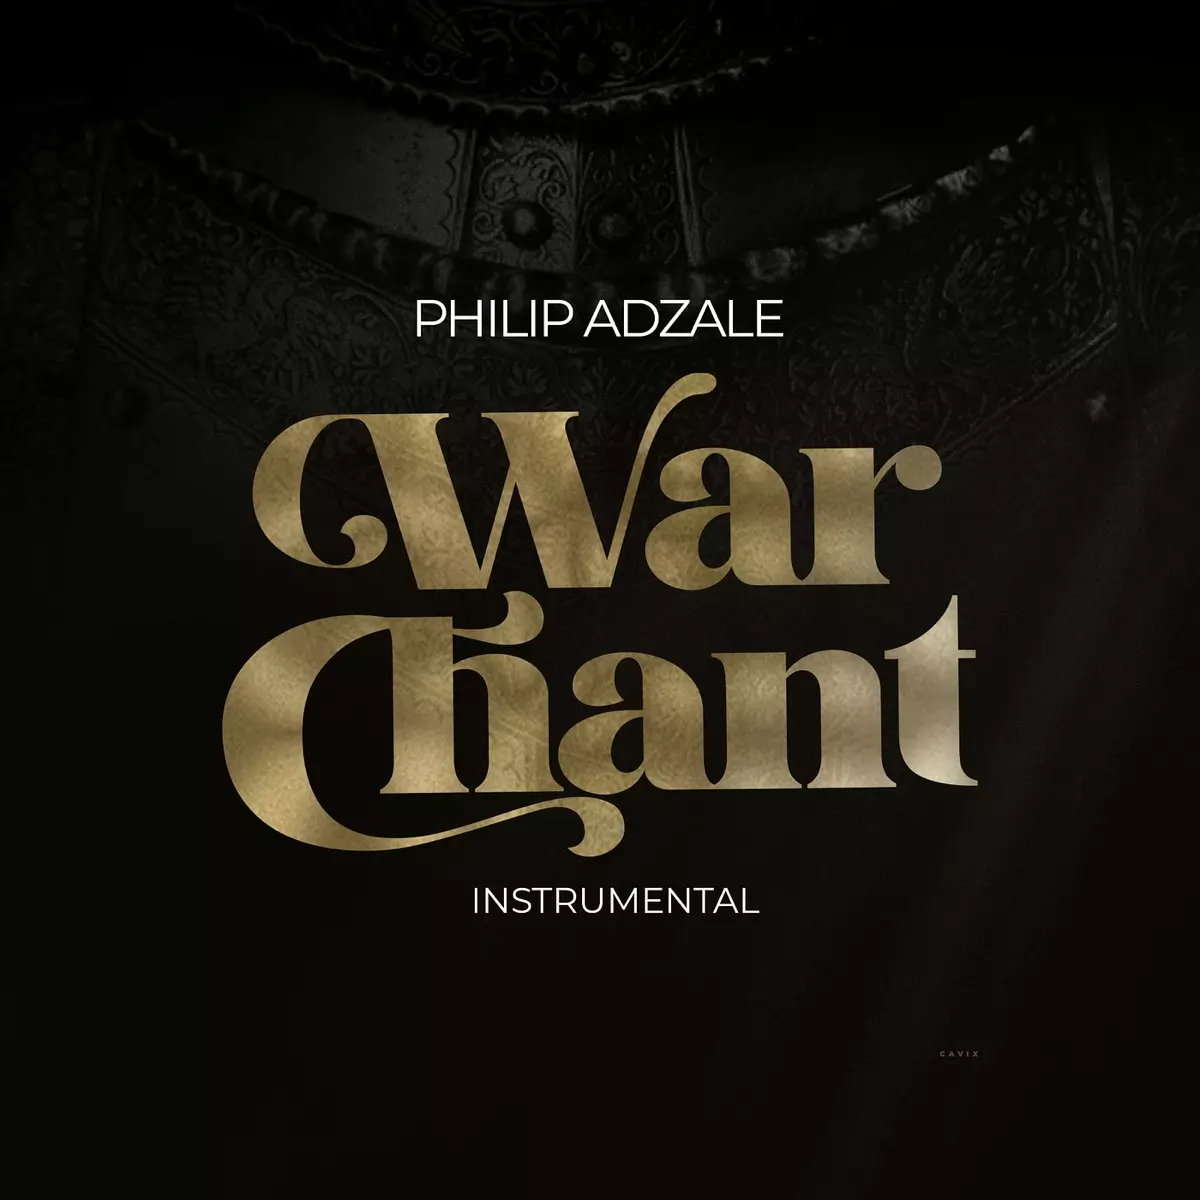 The Amen Chant - Single by Philip Adzale on Apple Music